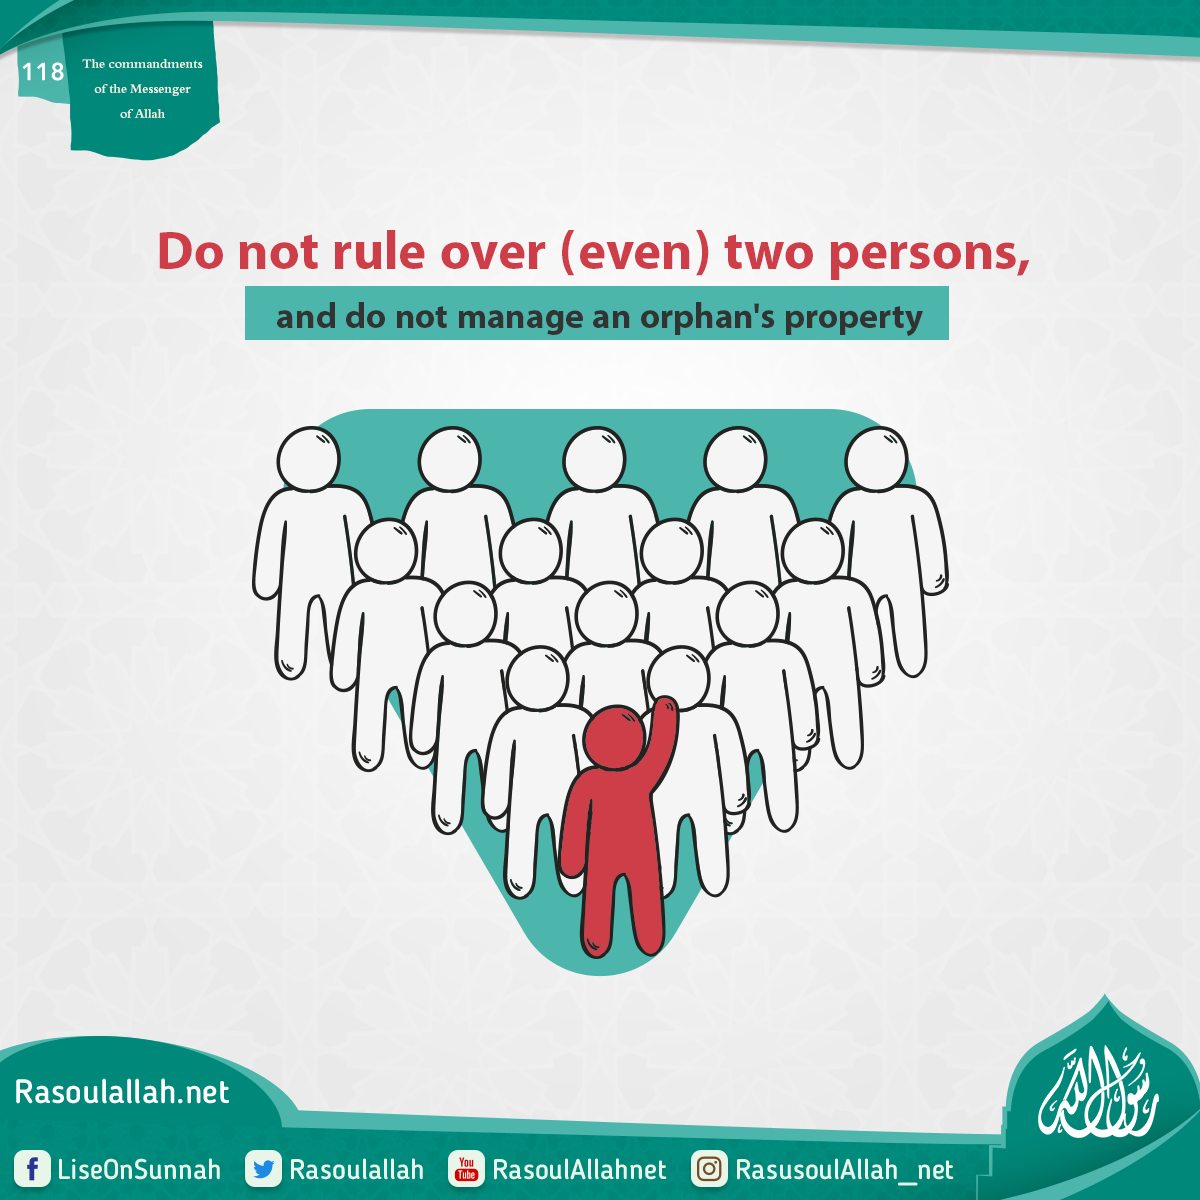 Do not rule over (even) two persons, and do not manage an orphan's property